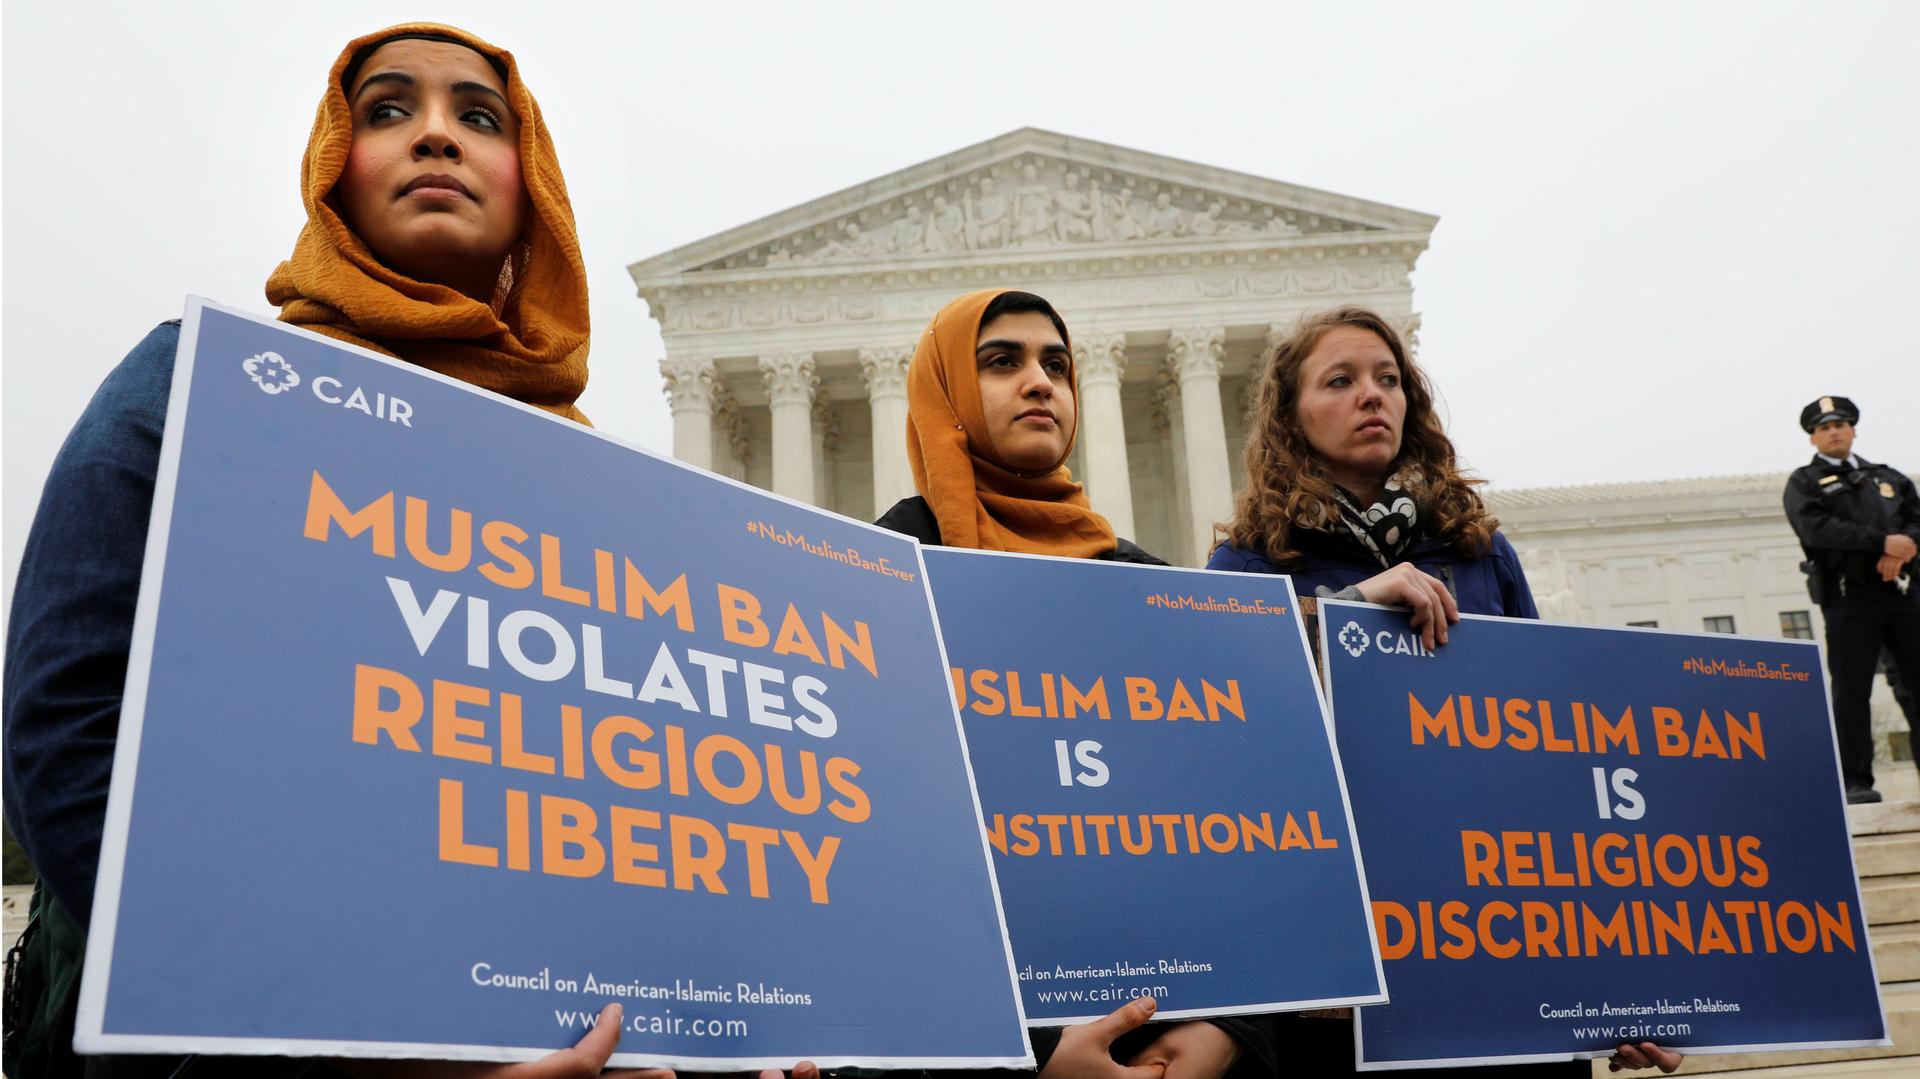 Protesters gather outside the U.S. Supreme Court in Washington, DC, U.S., April 25, 2018, while the court justices consider case regarding presidential powers as it weighs the legality of President Donald Trump's latest travel ban.